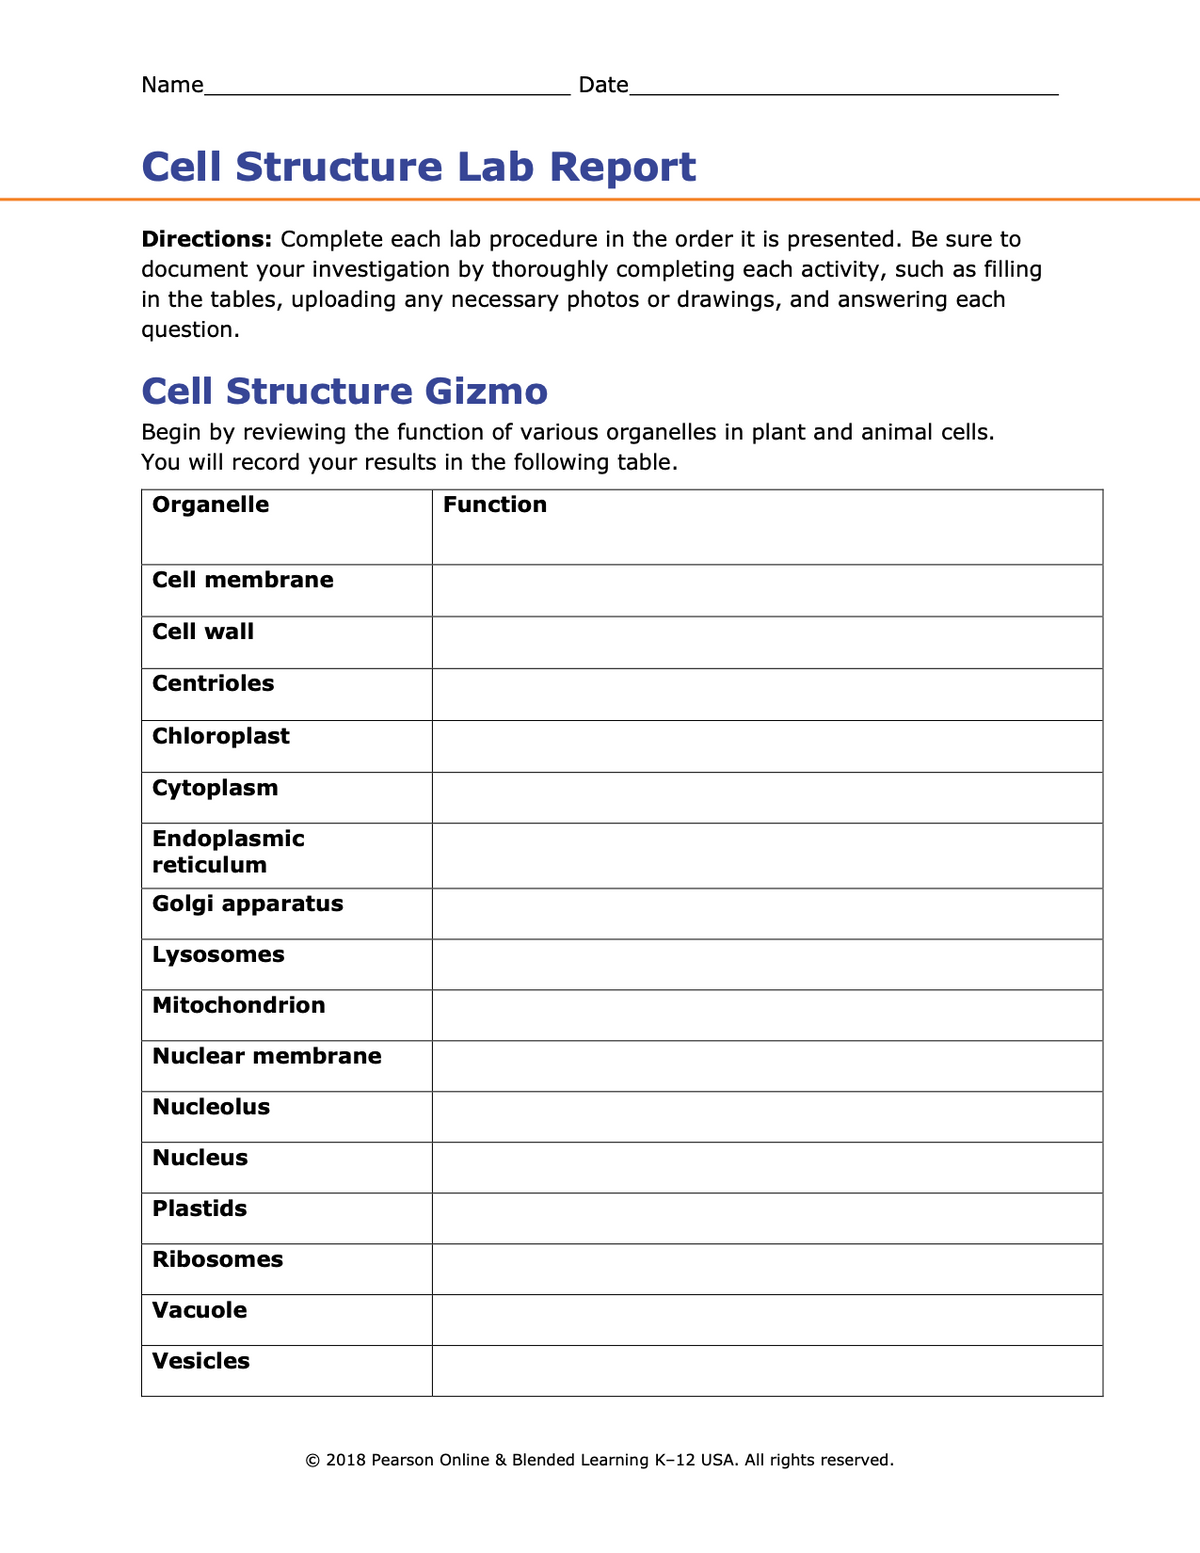 Answered: Cell Structure Gizmo Begin by reviewing… | bartleby